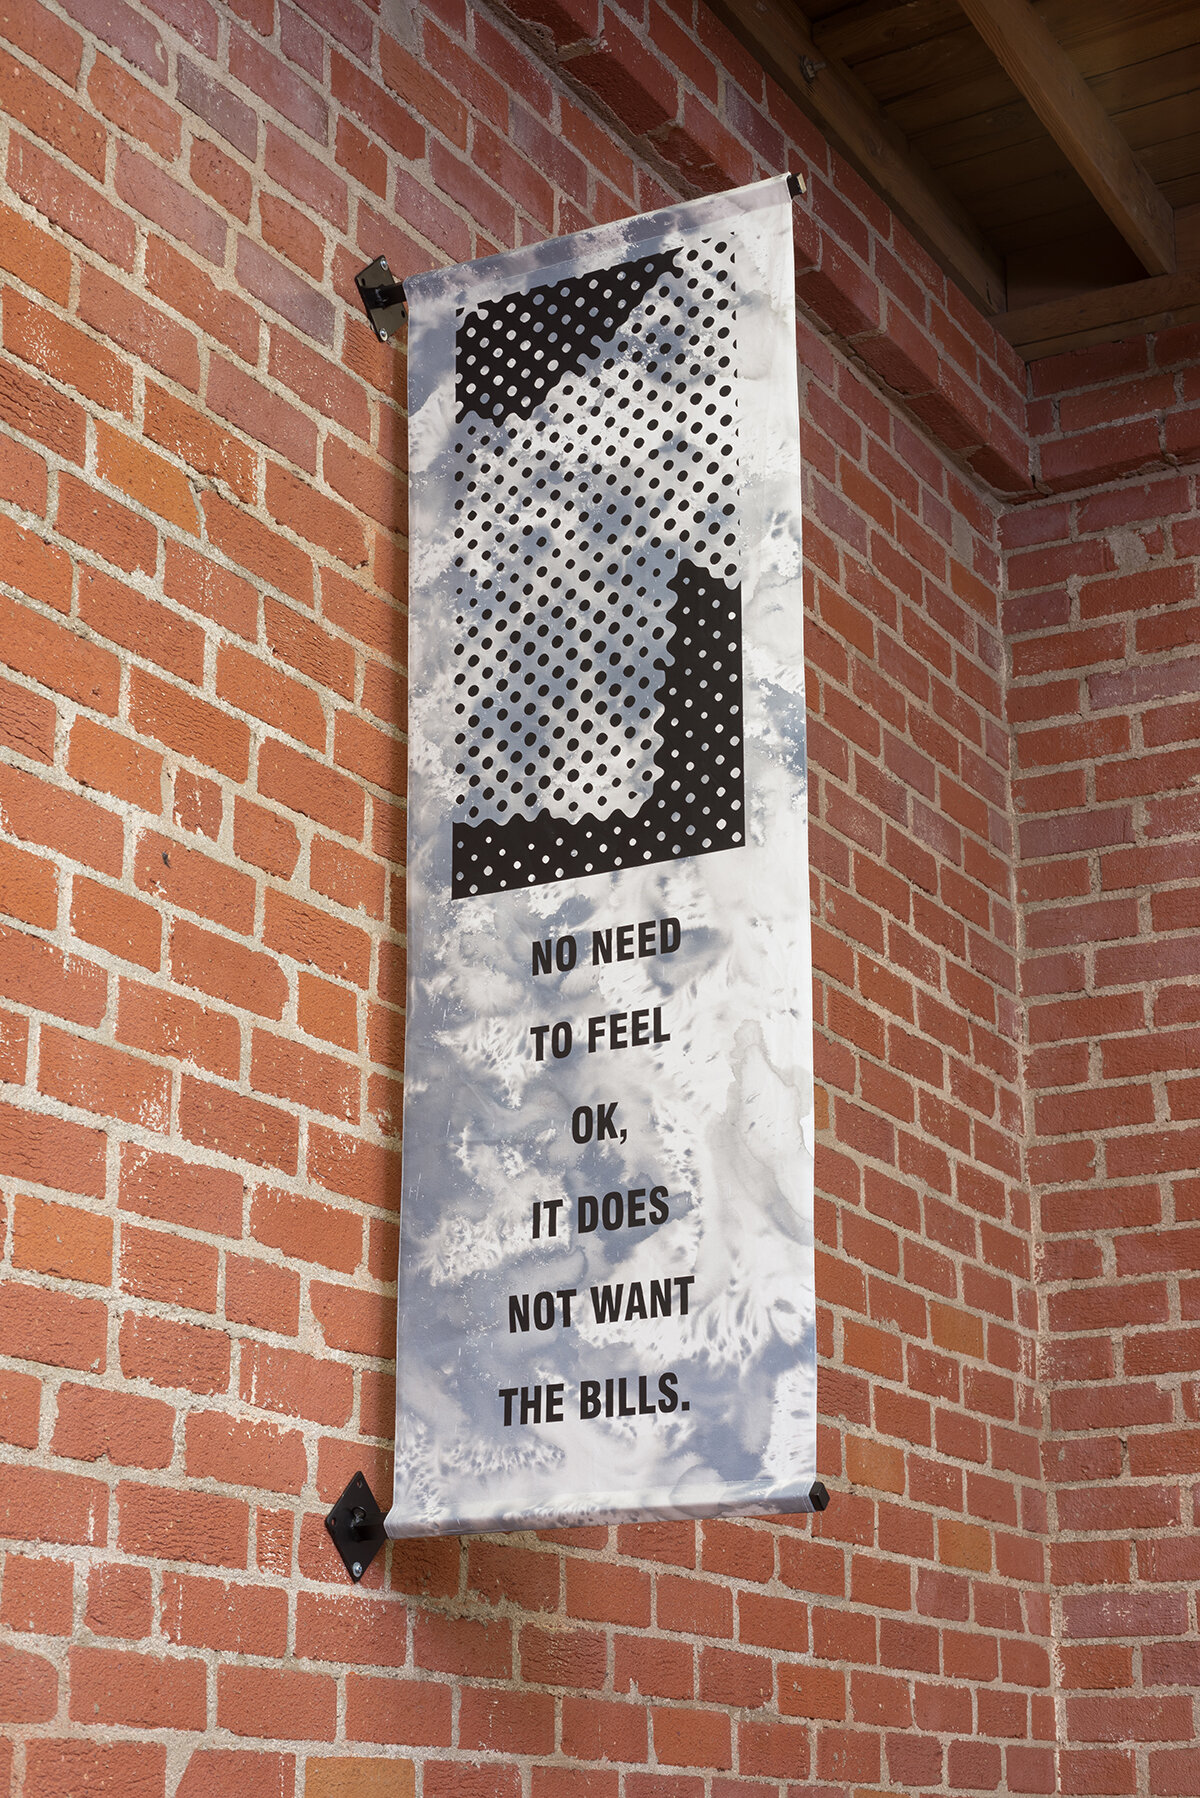   FPO Banner (Designed by Struggle Inc.),  2014. Acrylic on canvas with steel. 72 x 24 inches 